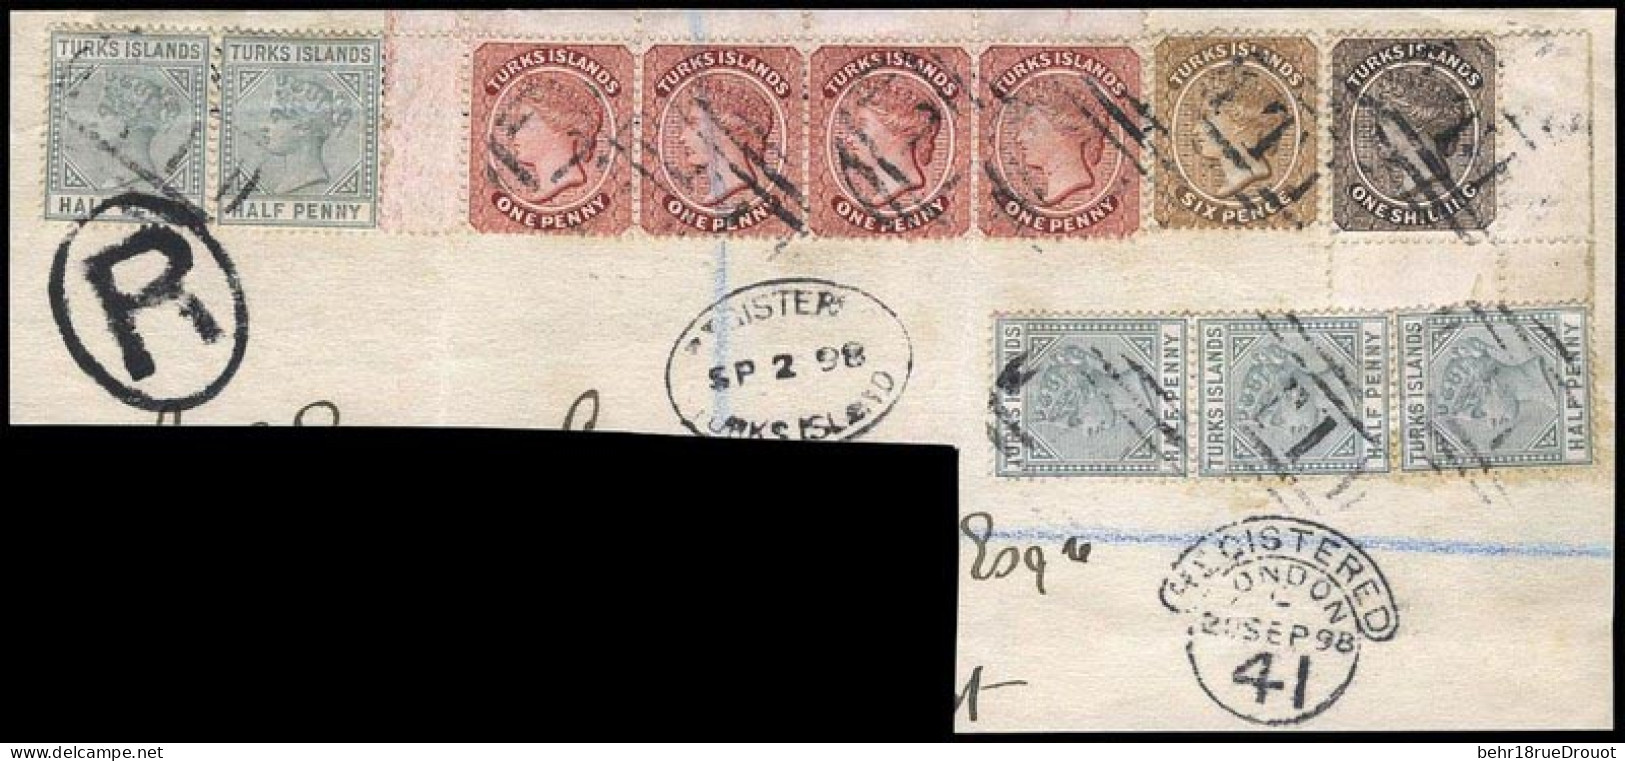 Obl. SG#53x5 + 58x4 - + 59 + 60. Used On Part Of Letter. VF. - Turks & Caicos